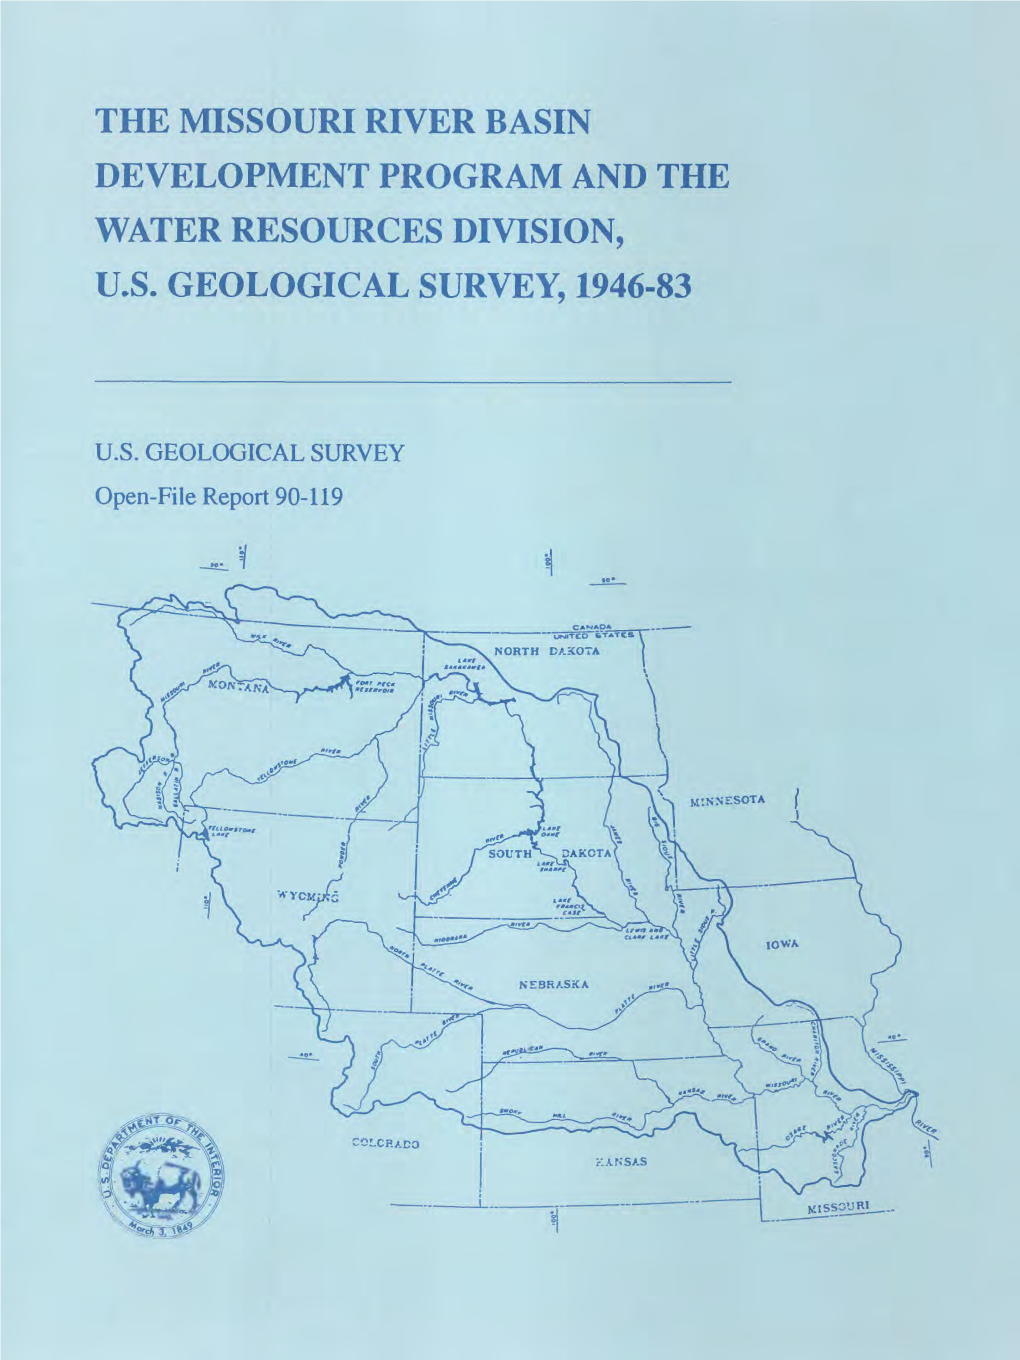 The Missouri River Basin Development Program and the Water Resources Division, U.S